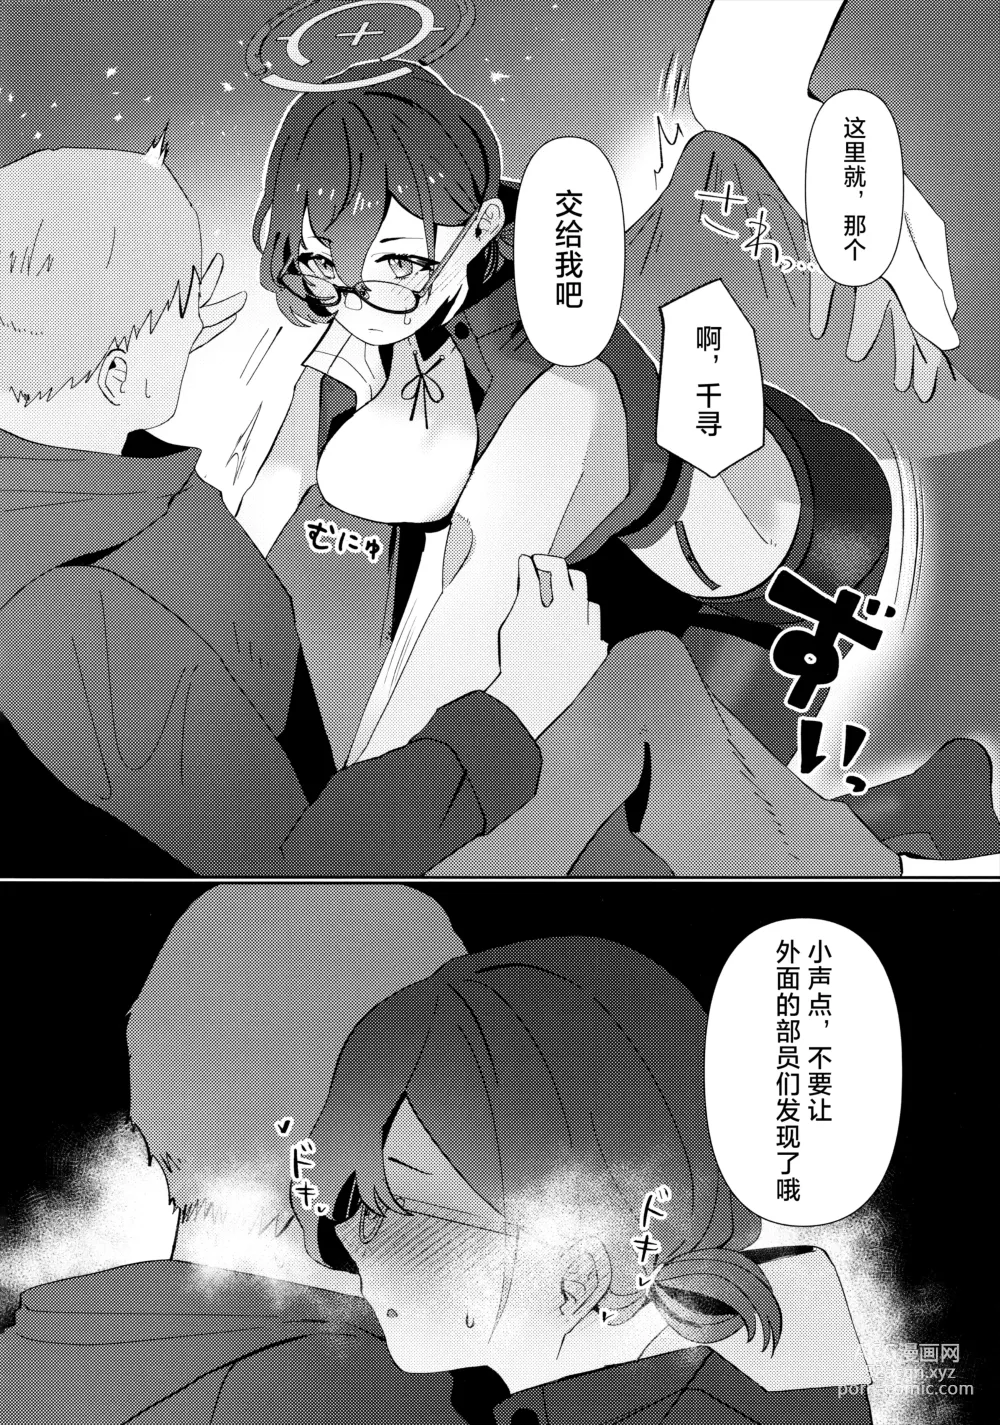 Page 8 of doujinshi 夜半时分的骇入